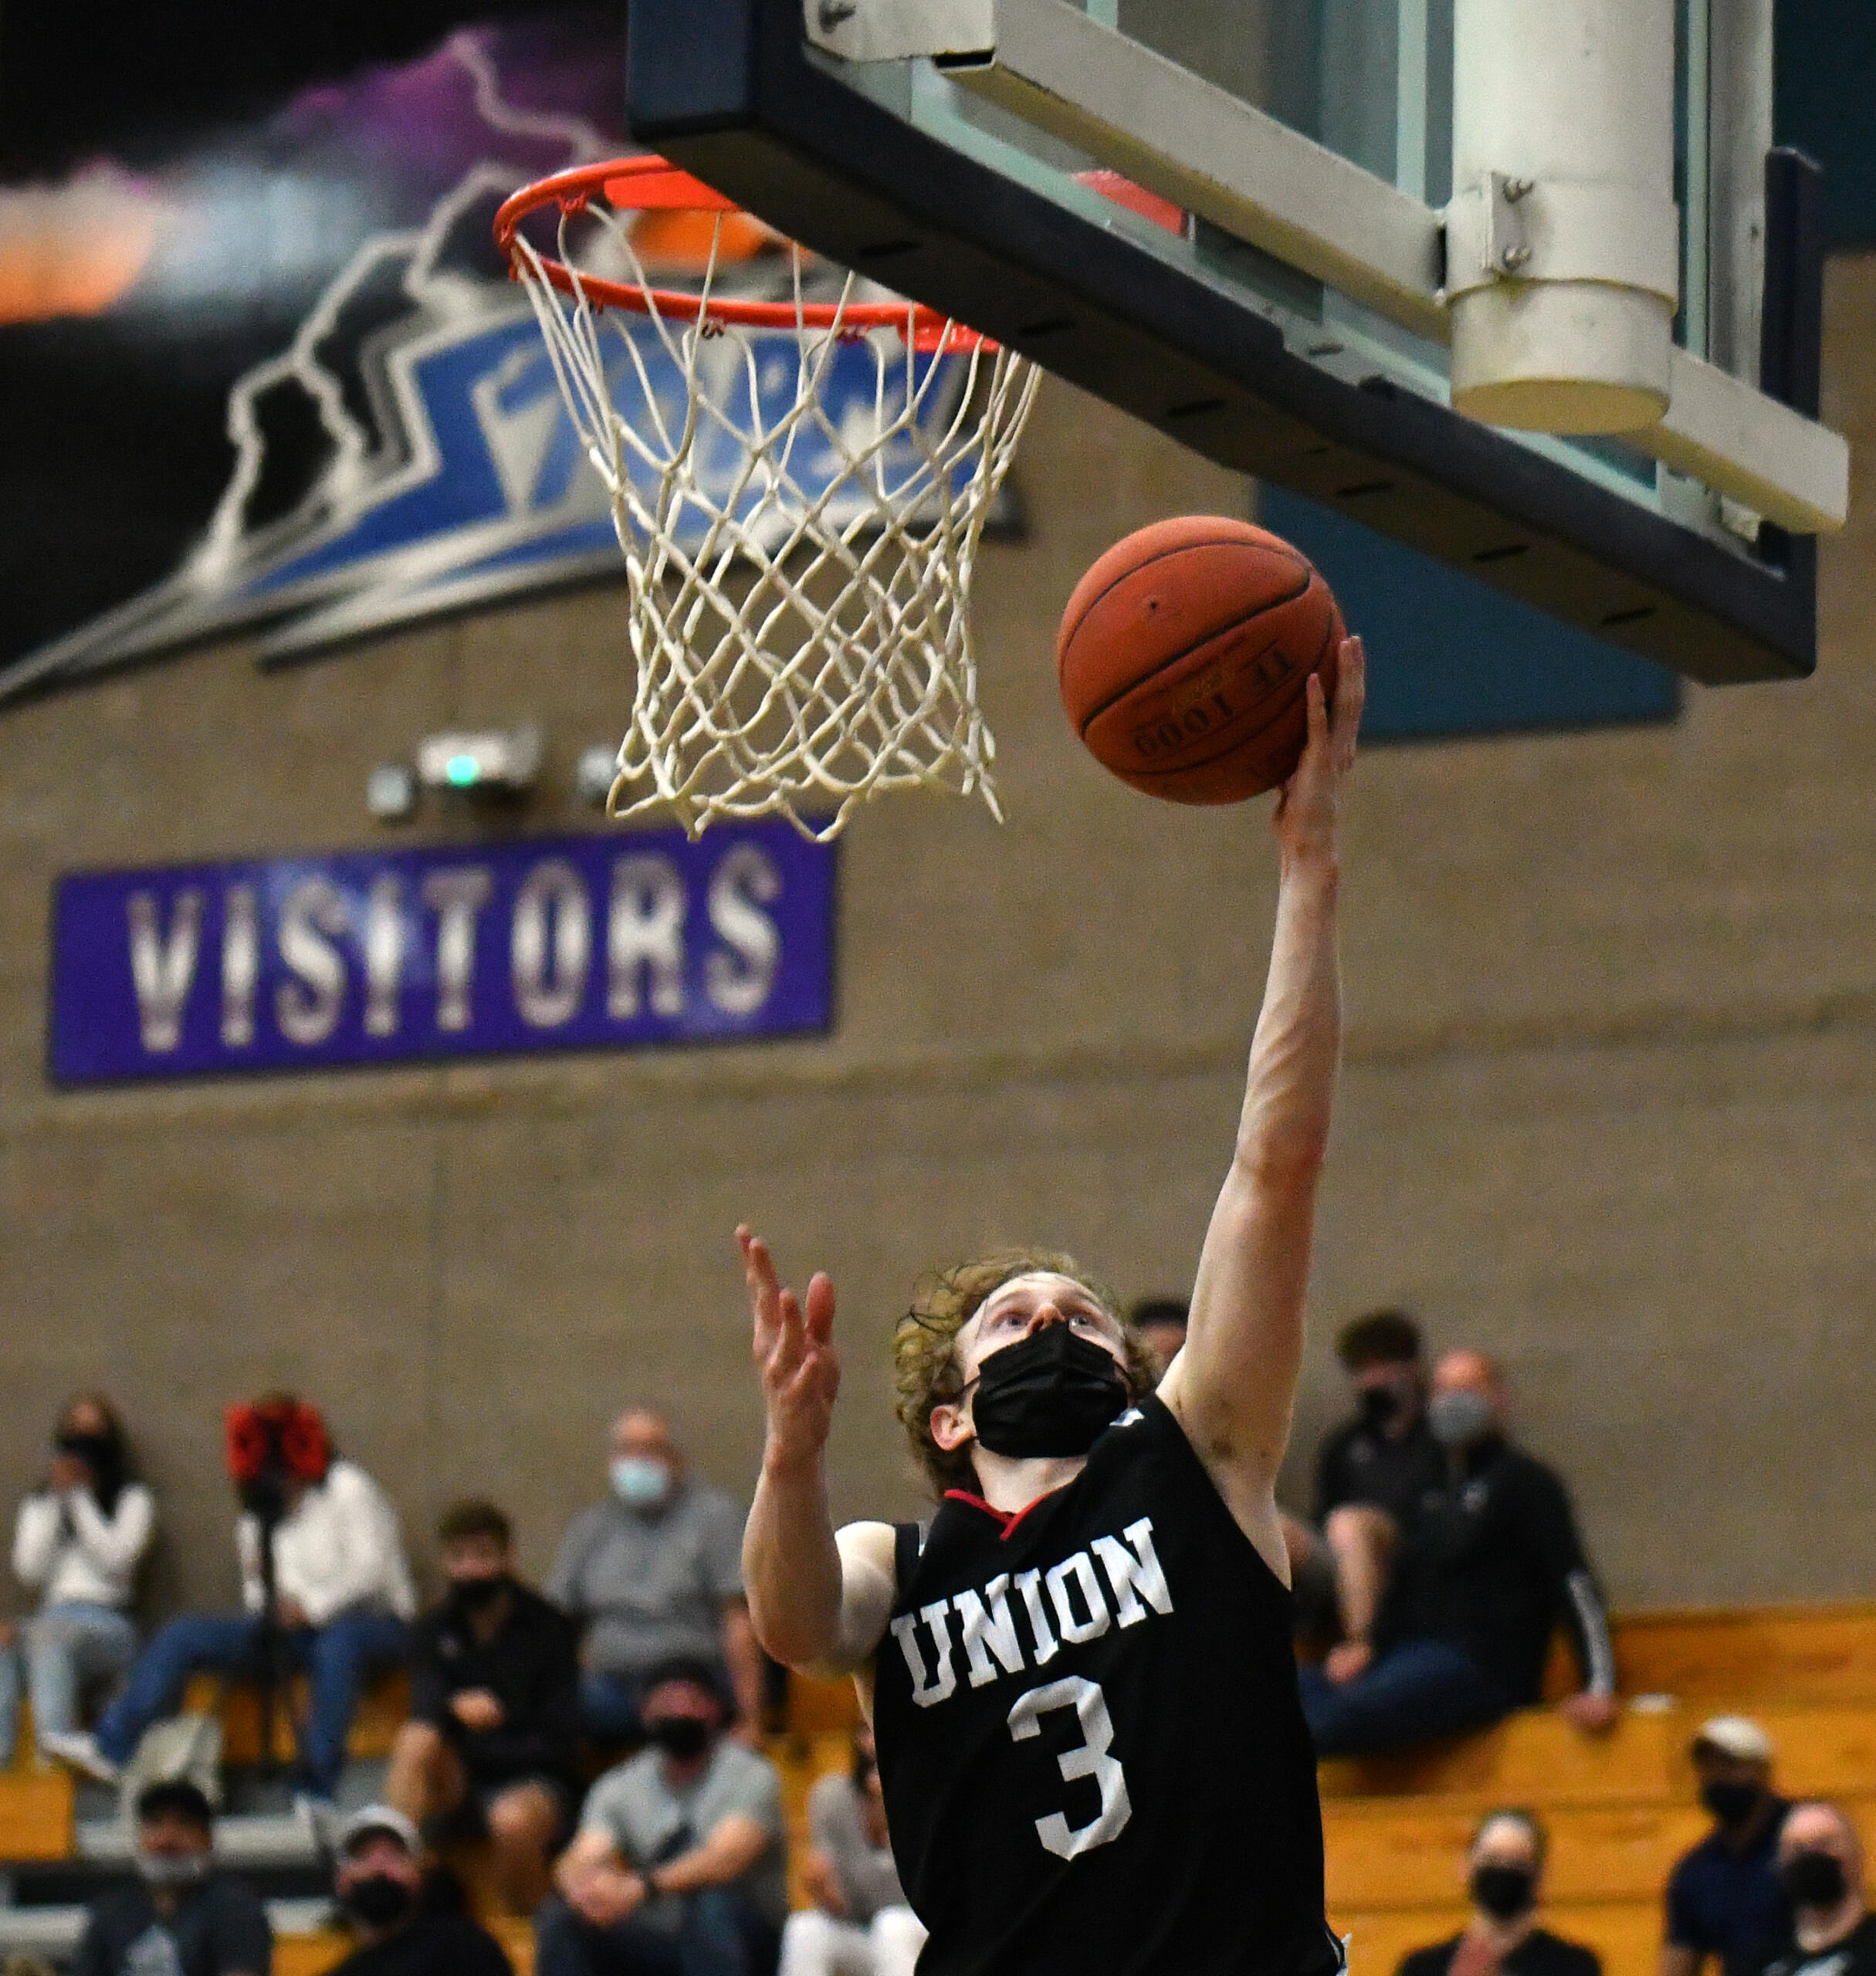 Union High School junior Bryson Metz shoots the ball Tuesday, April 27, 2021, during the TitanÕs 79-71 win against Skyview at Skyview High School.